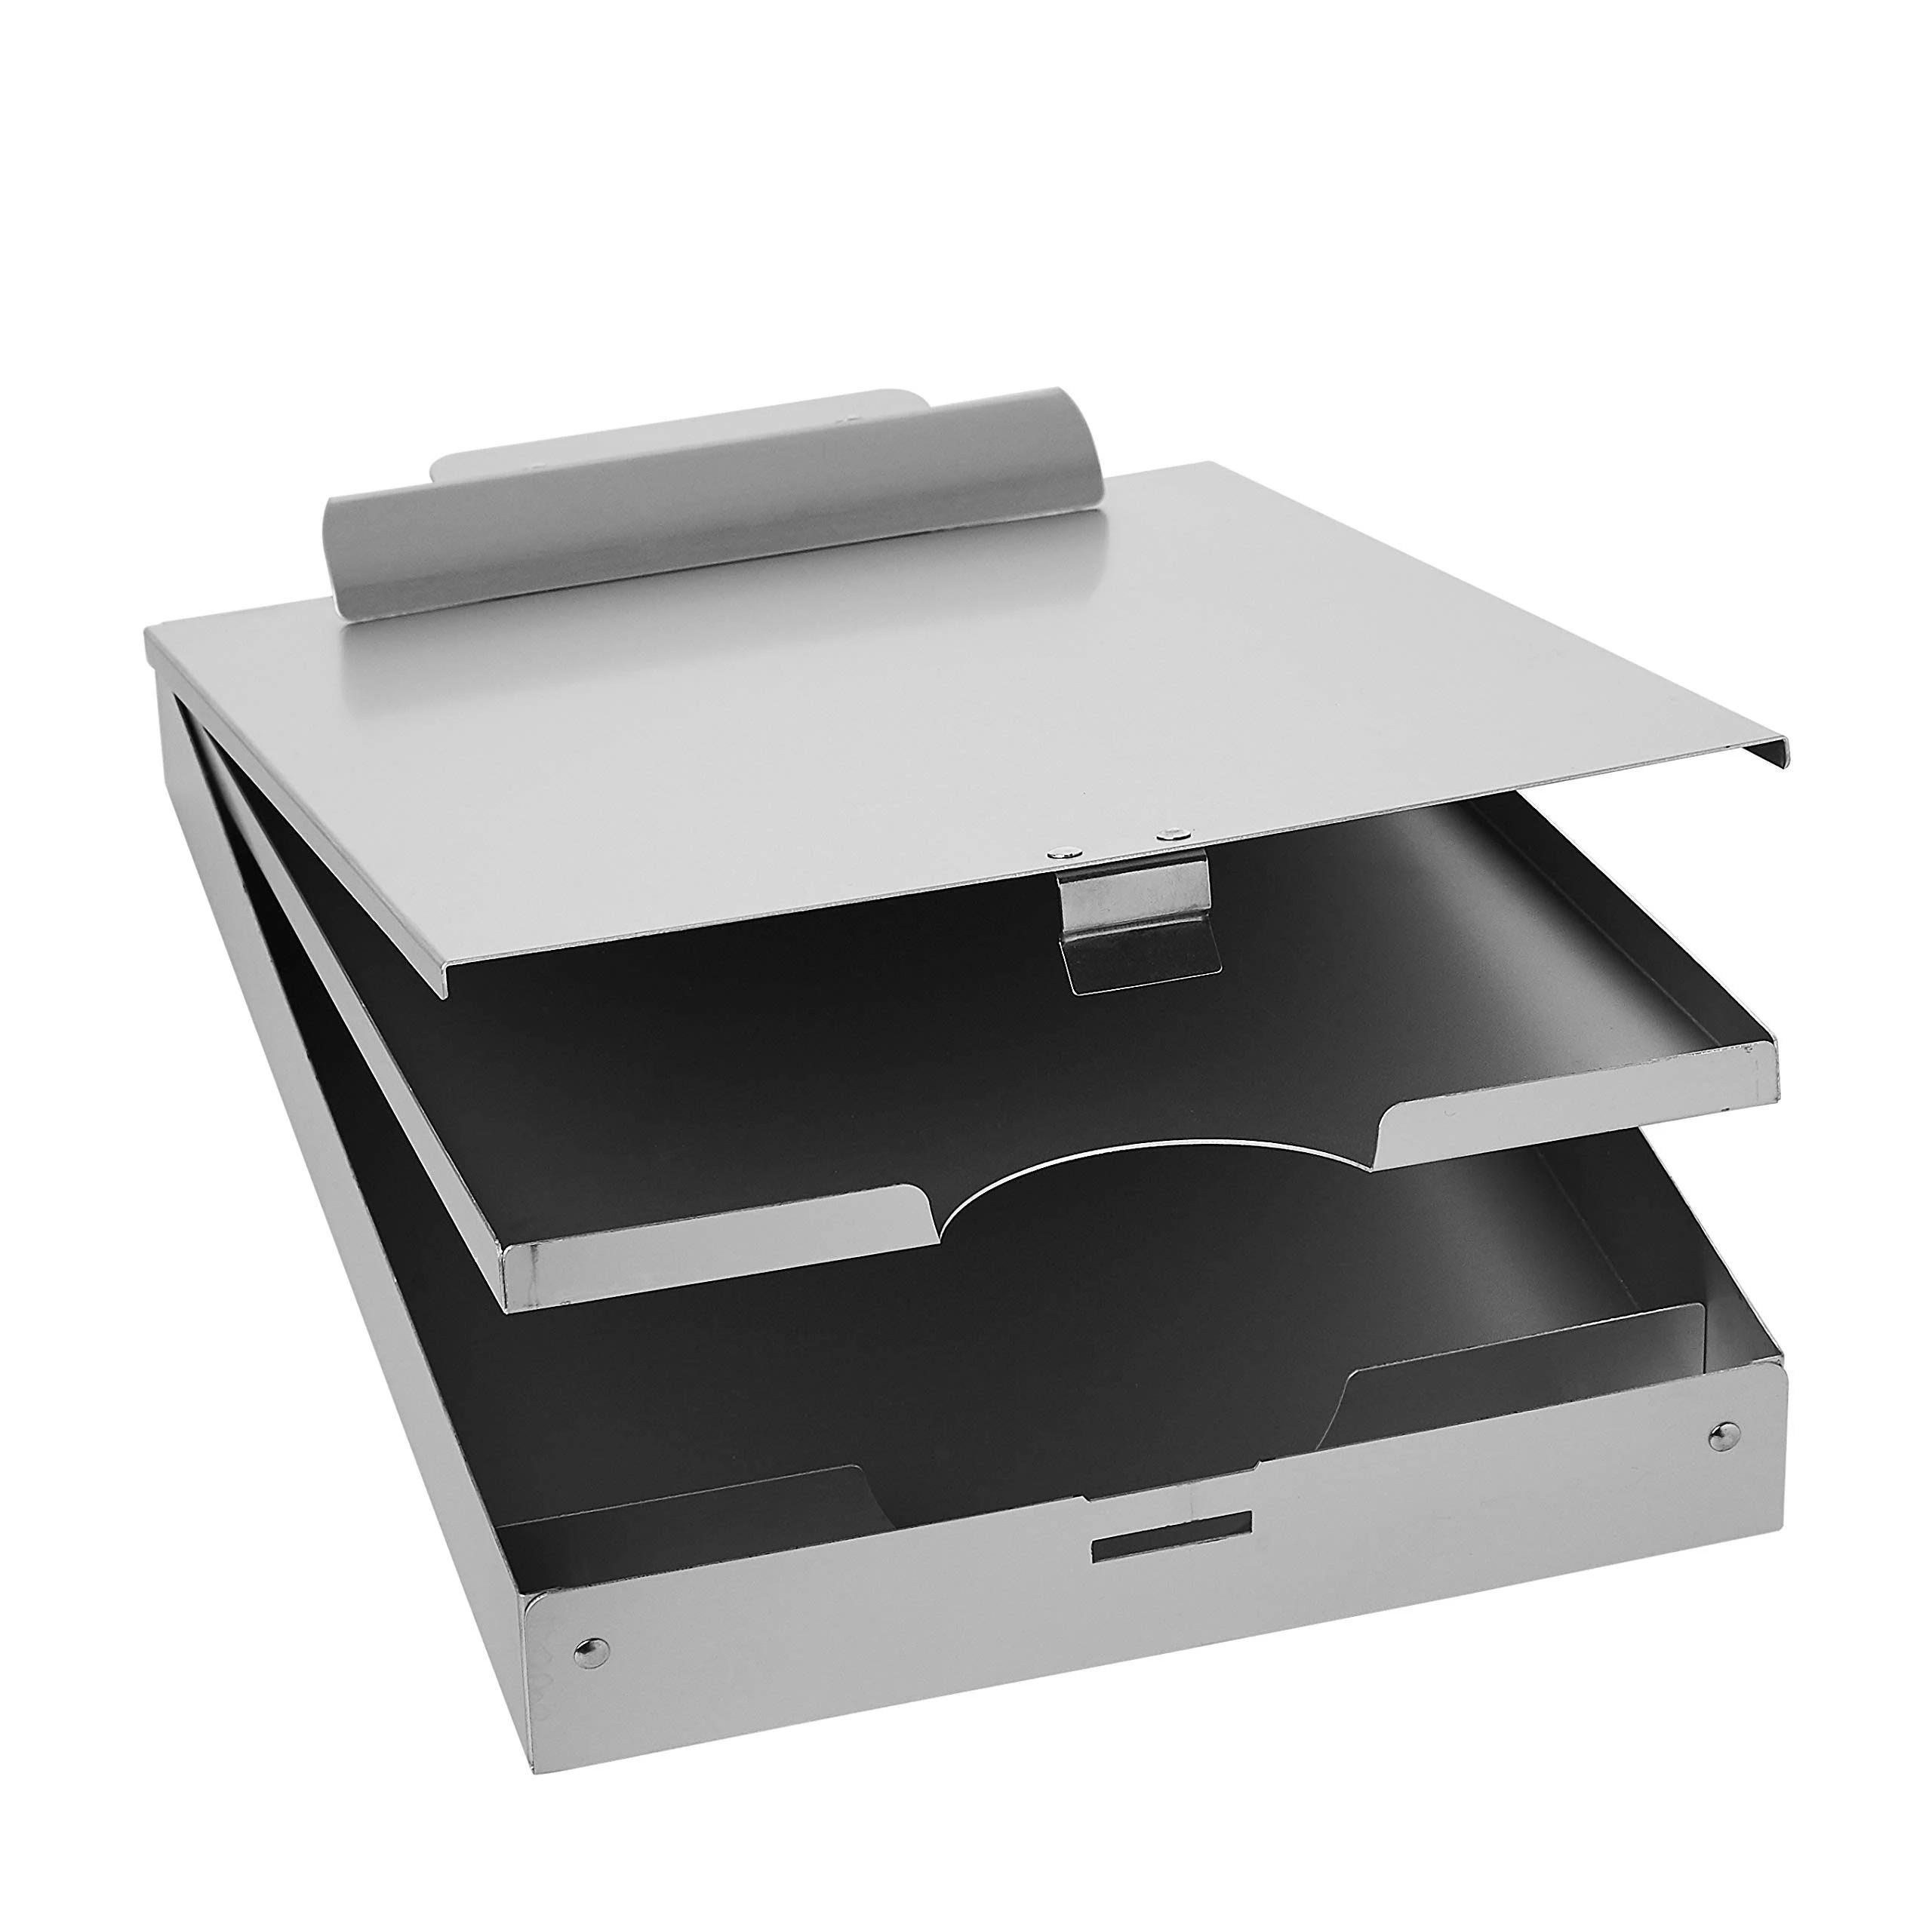 Three-Tier Aluminum Clipboard with Paper Storage | Image